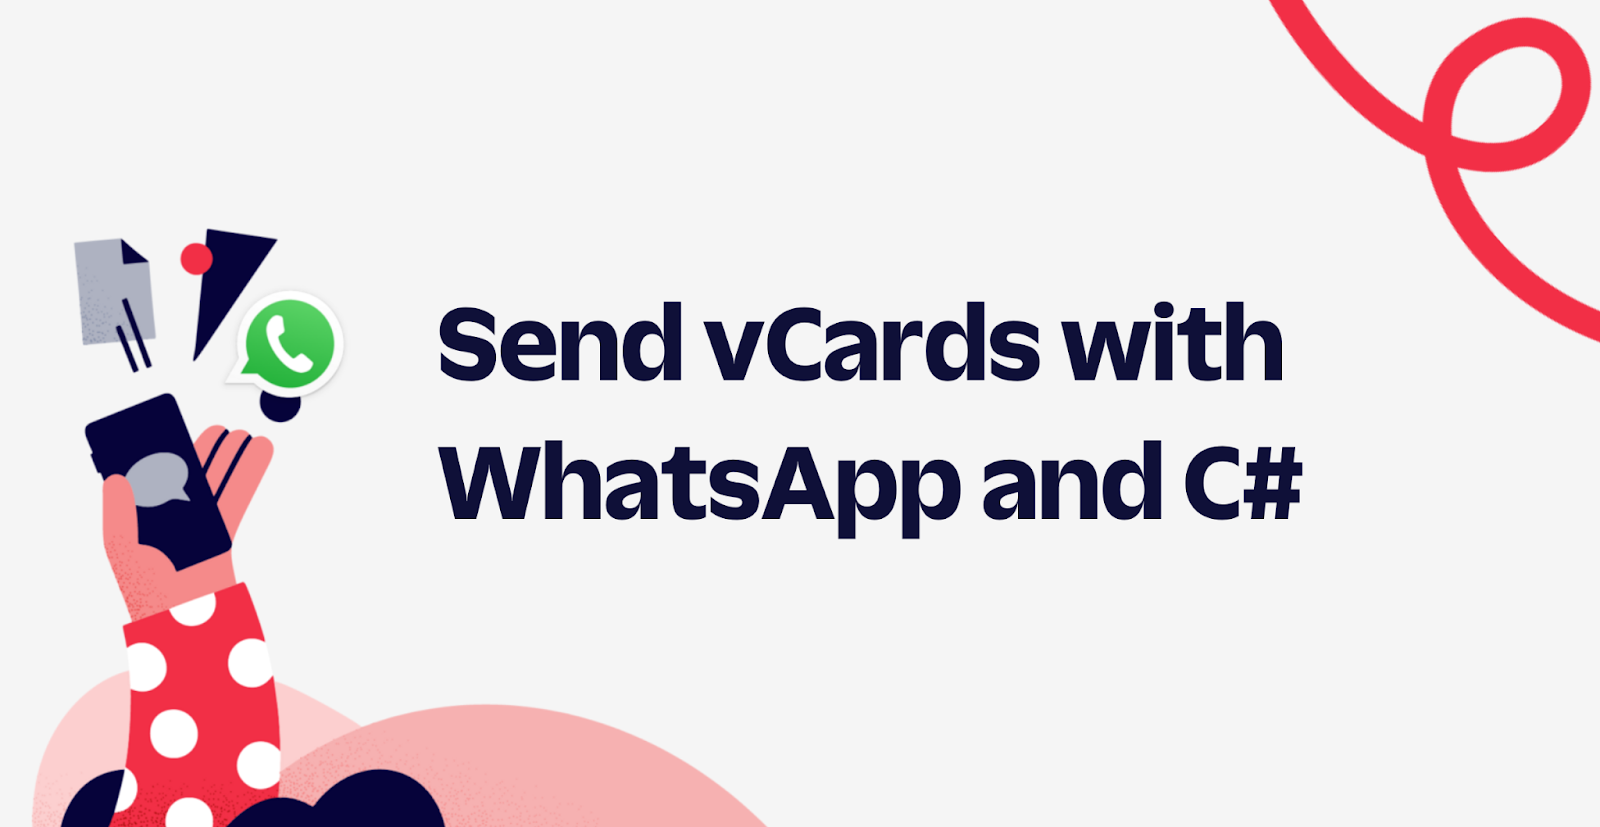 Send vCards with WhatsApp and C#